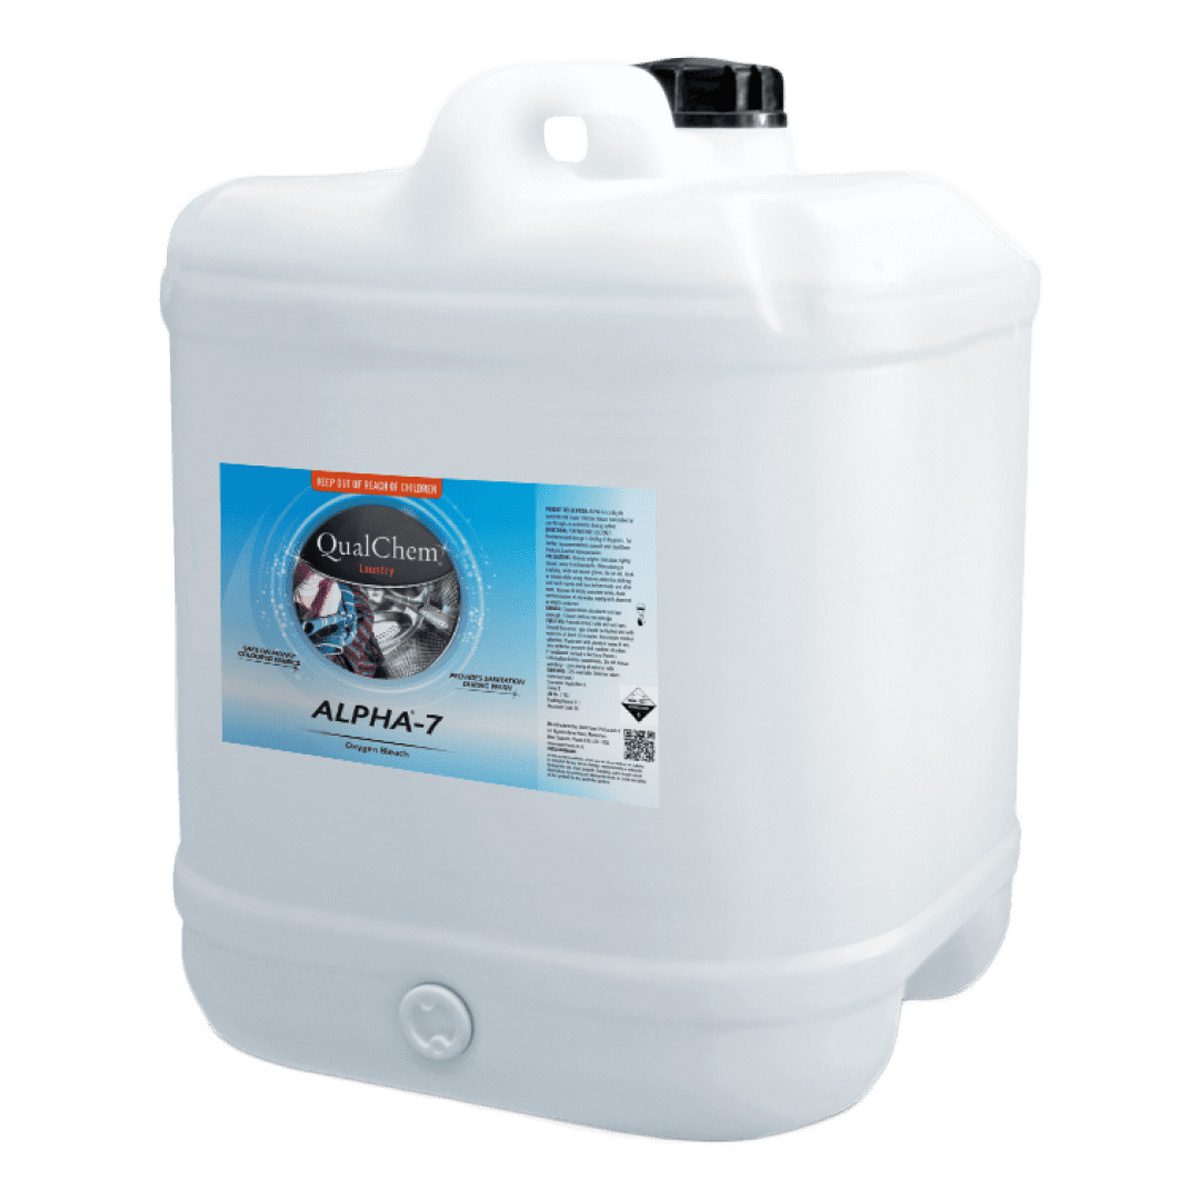 cleaning-products-laundry-qualchem-alpha-7-oxygen-bleach-25kg-highly-concentrated-oxygen-bleach-formulated-for-use-through-an-automatic-dosing-system-vjs-distributors-ALPHA-7